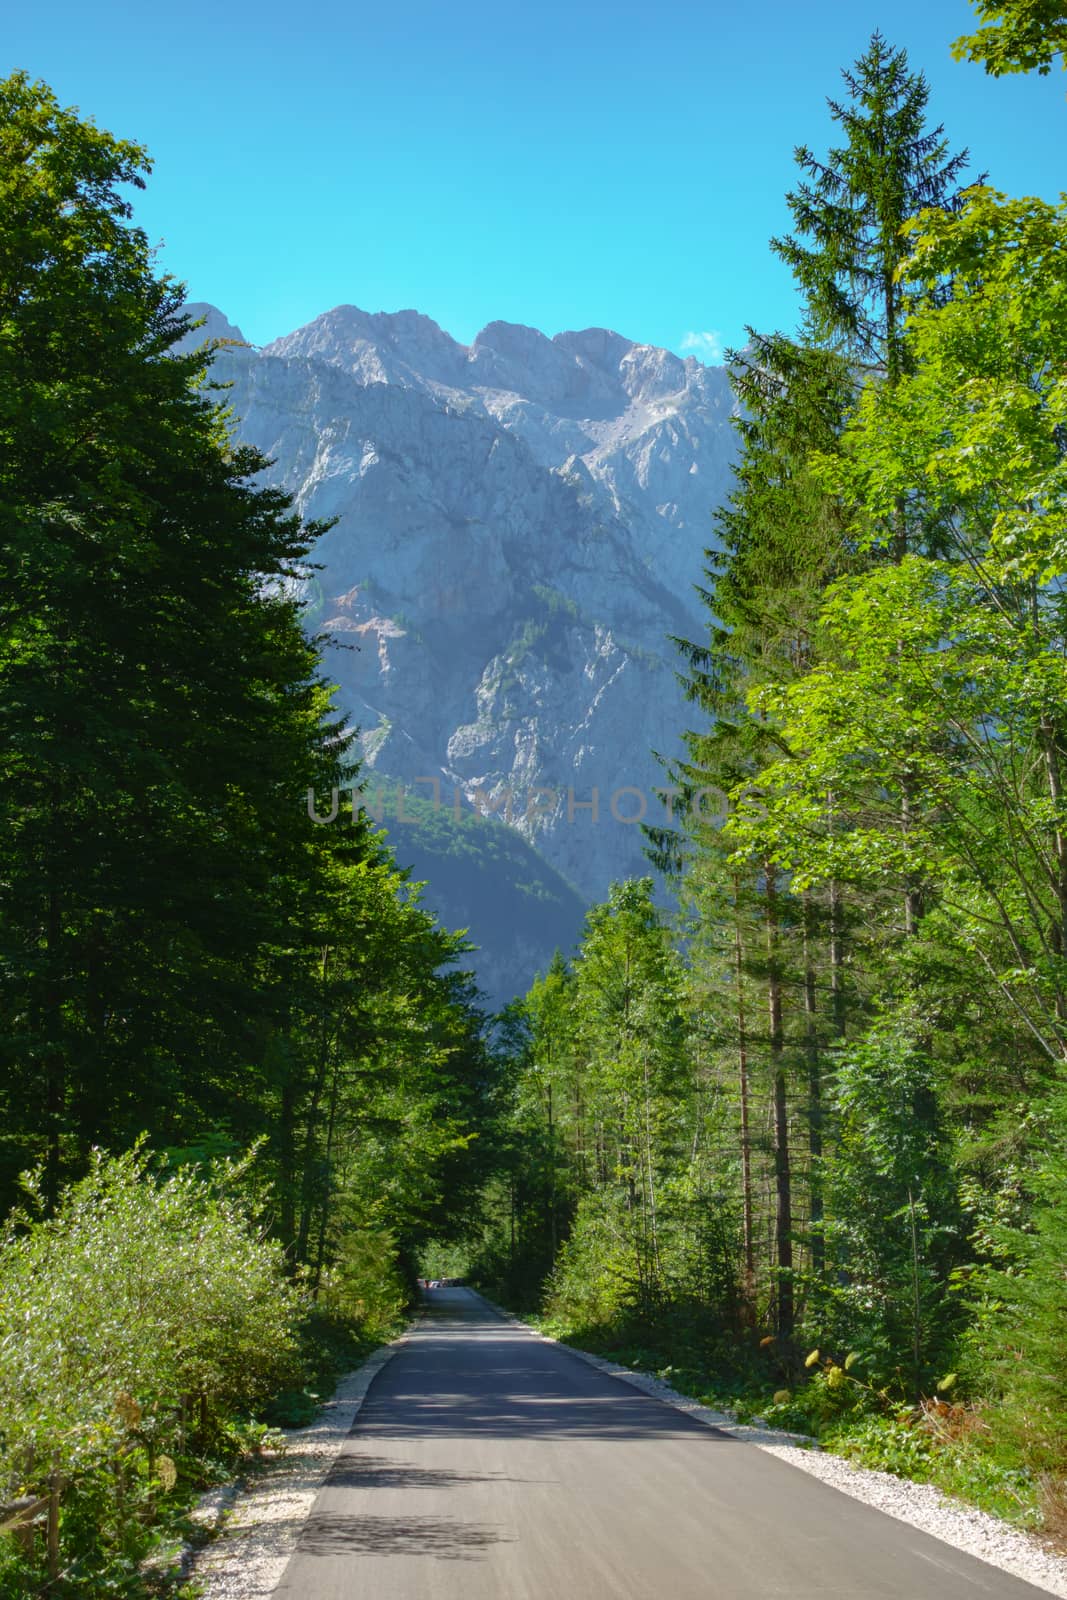 Alpine road leading into a valley on a sunny day, mountains in background by asafaric